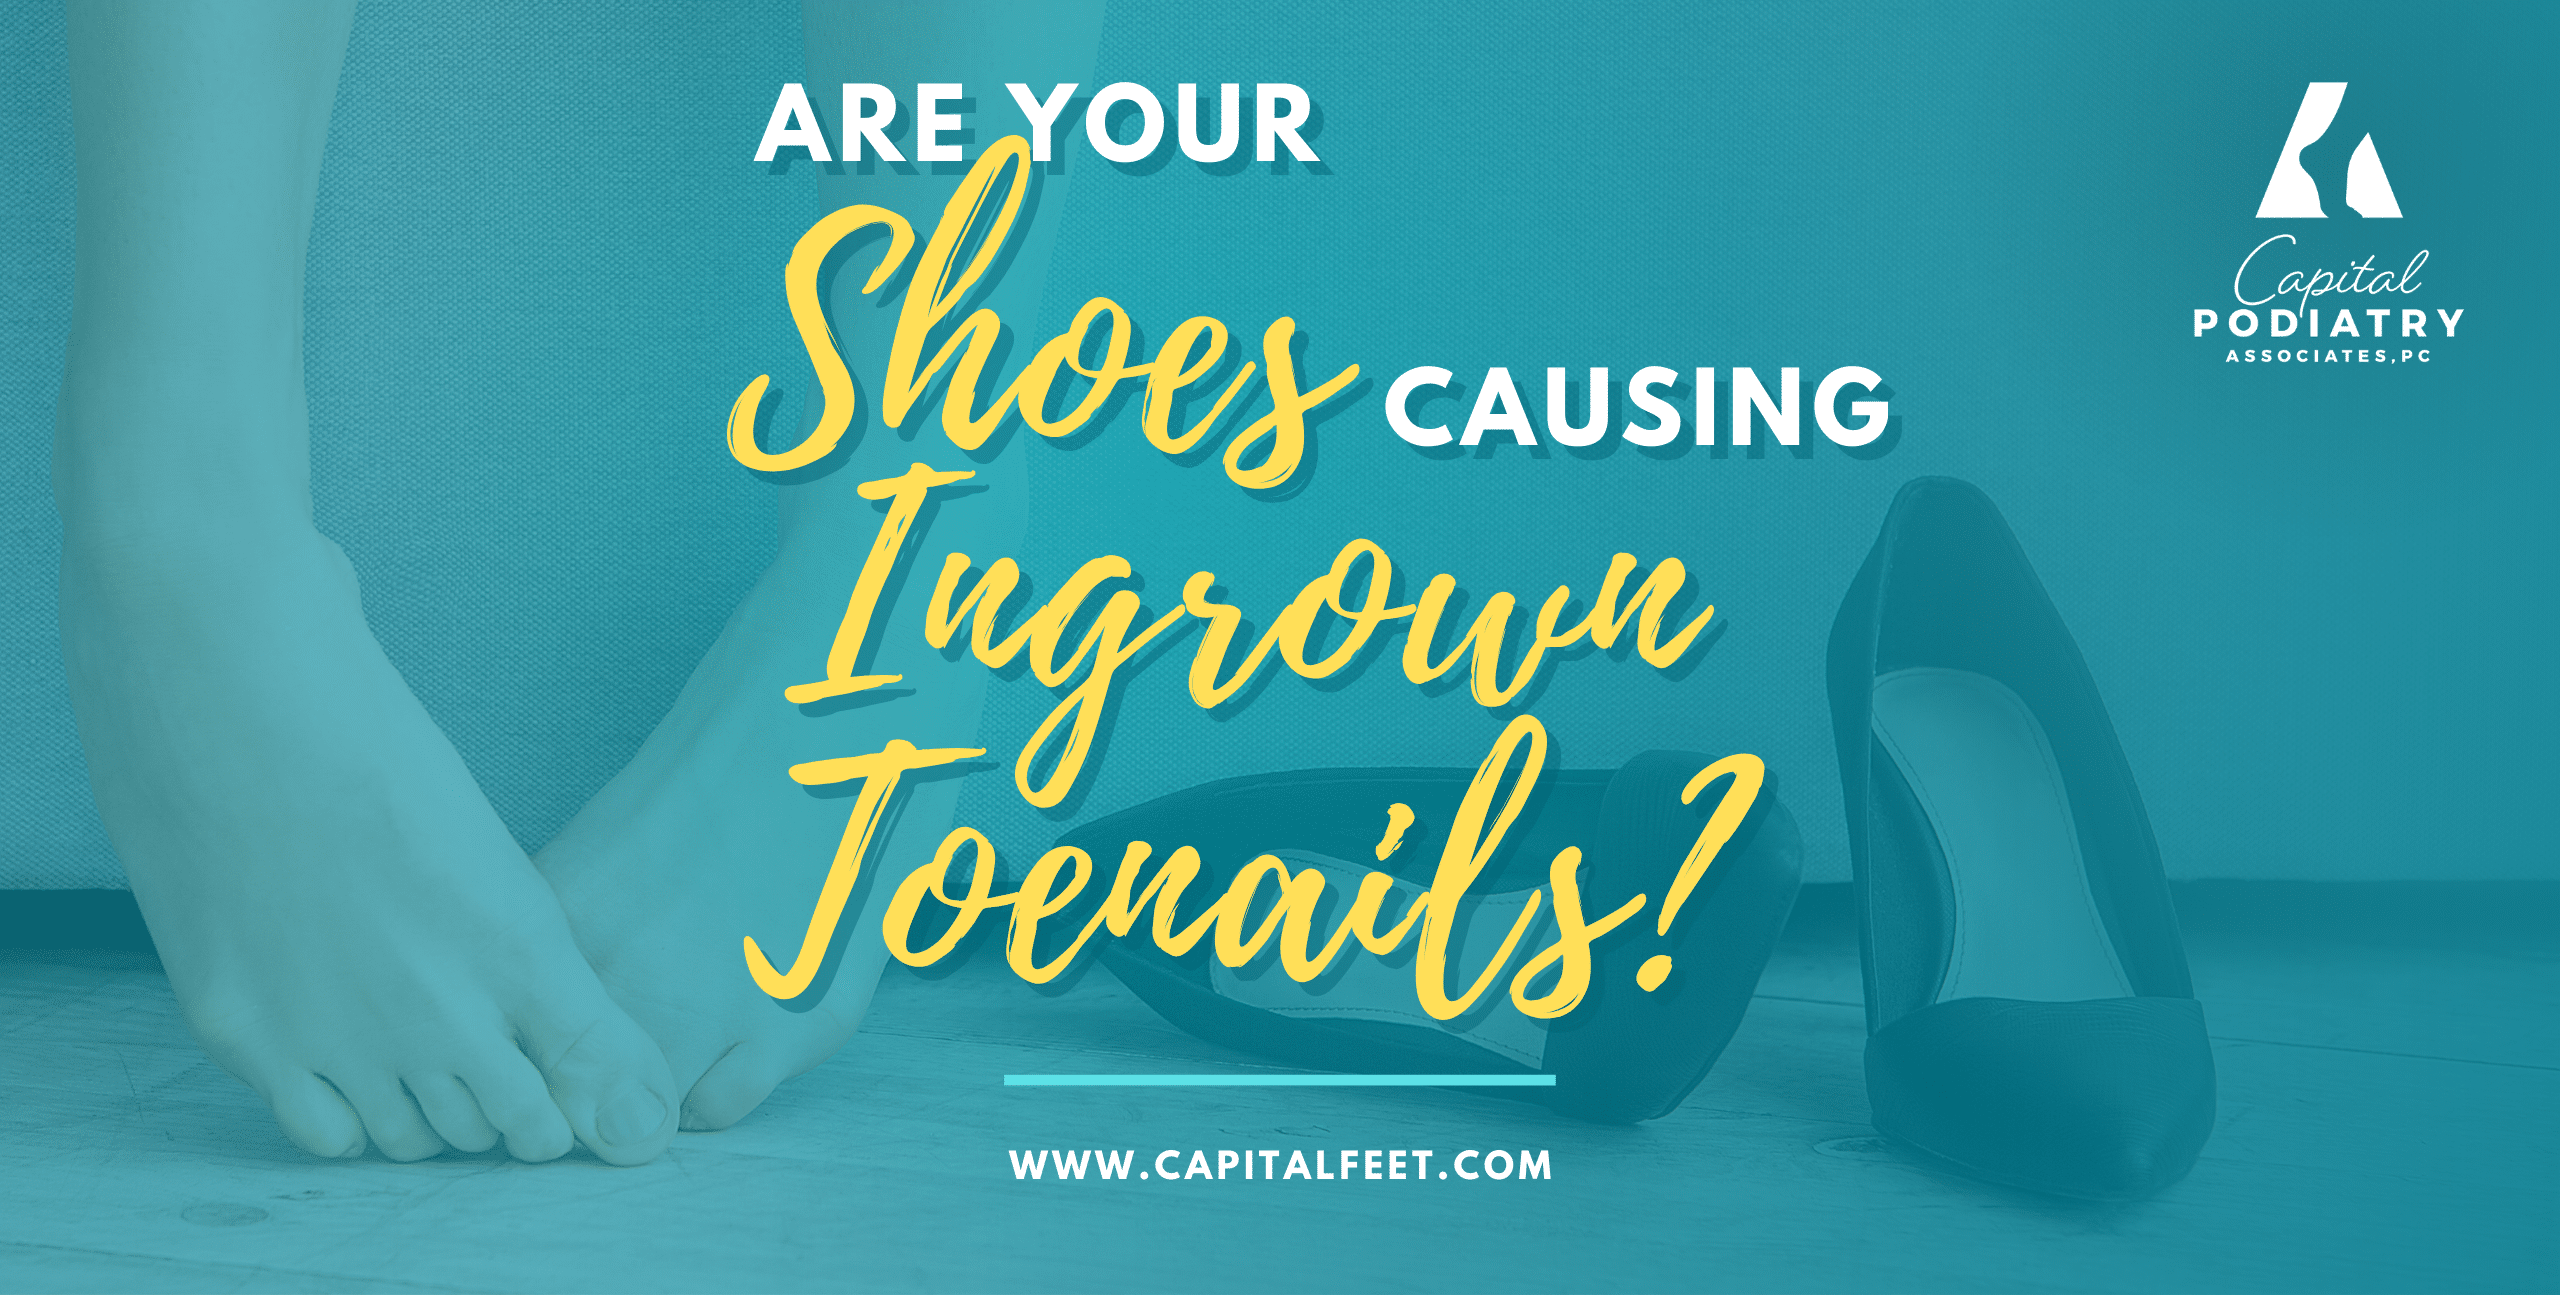 Are your shoes causing ingrown toenails?